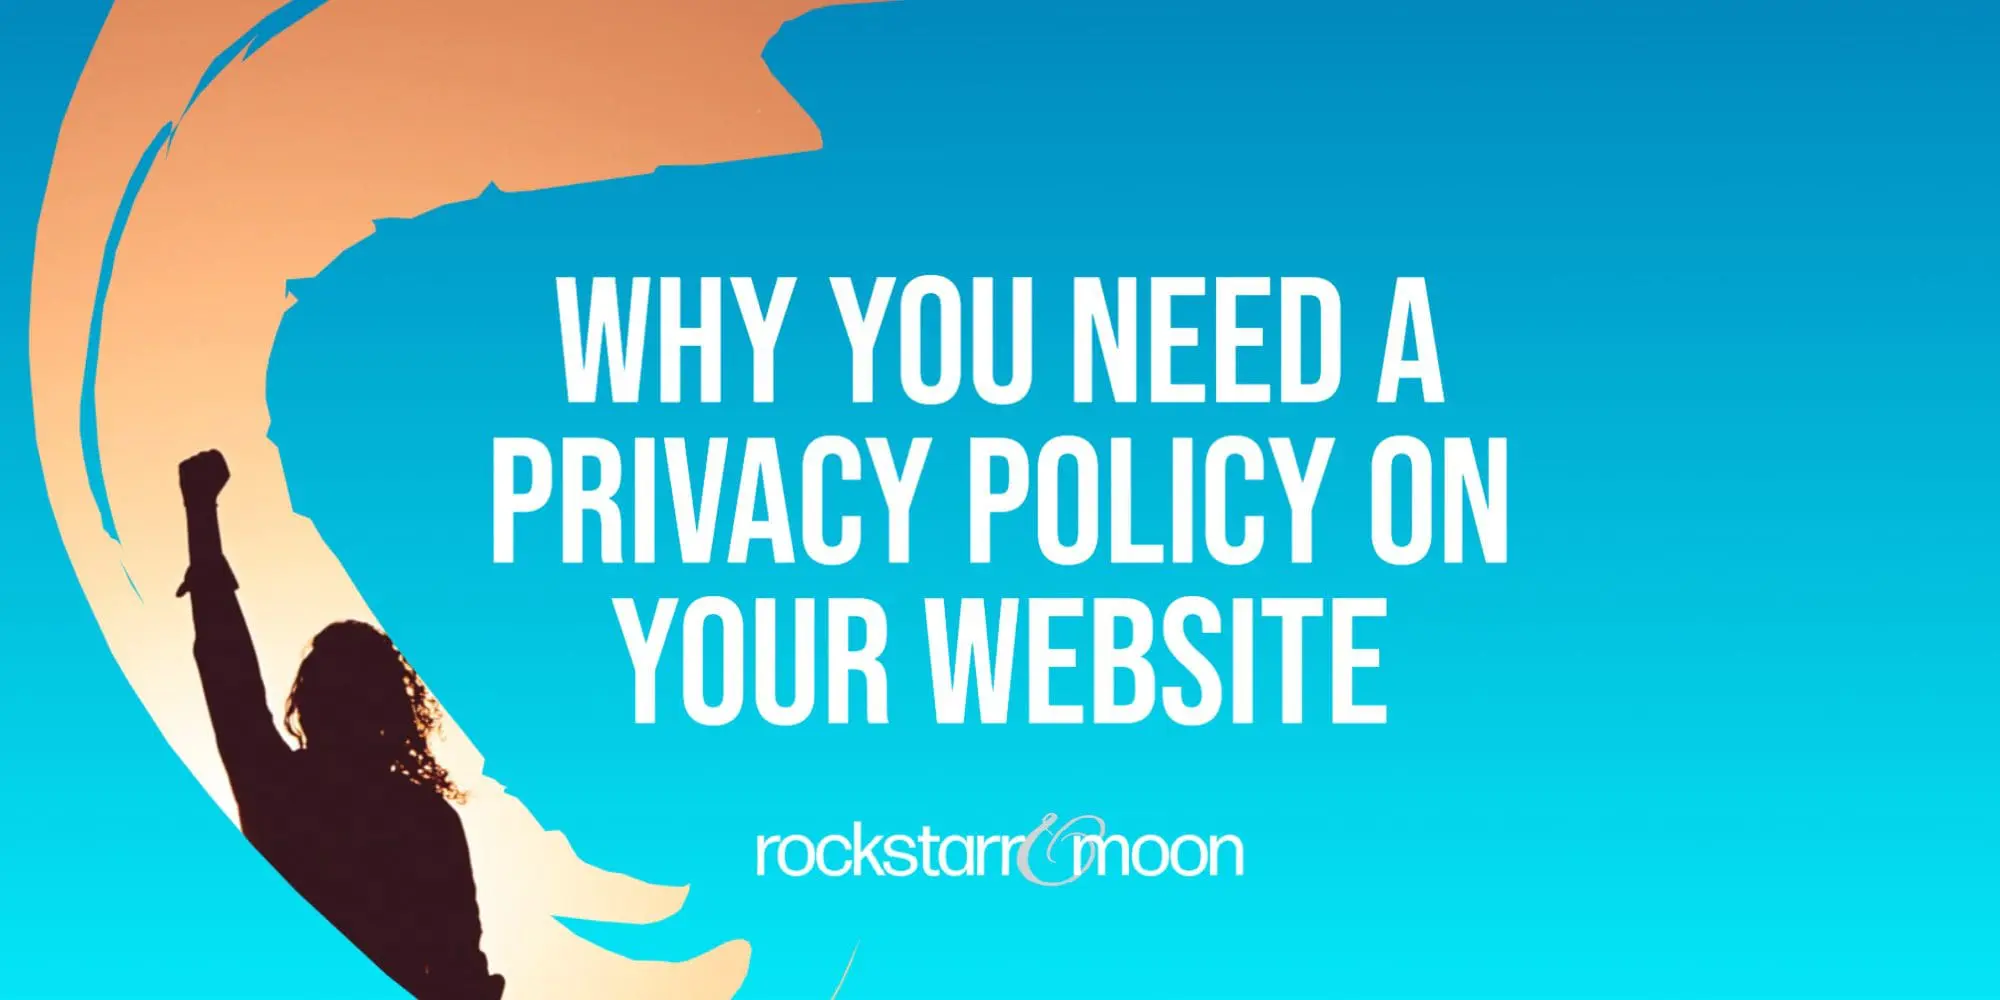 Why You Need a Privacy Policy on Your Website